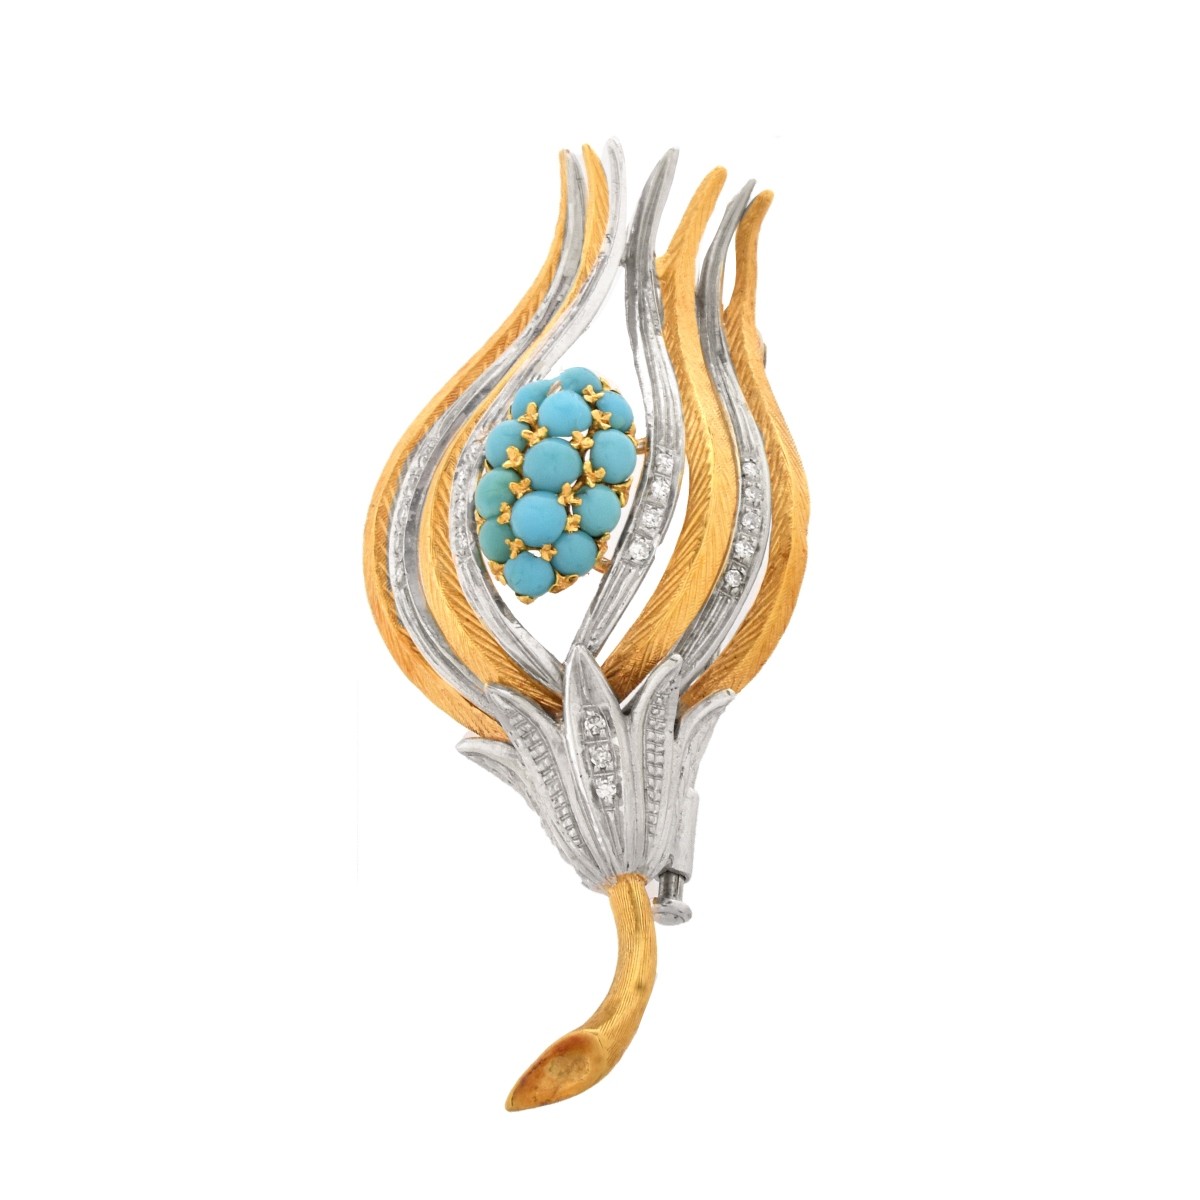 Diamond, Turquoise and 18K Flower Brooch